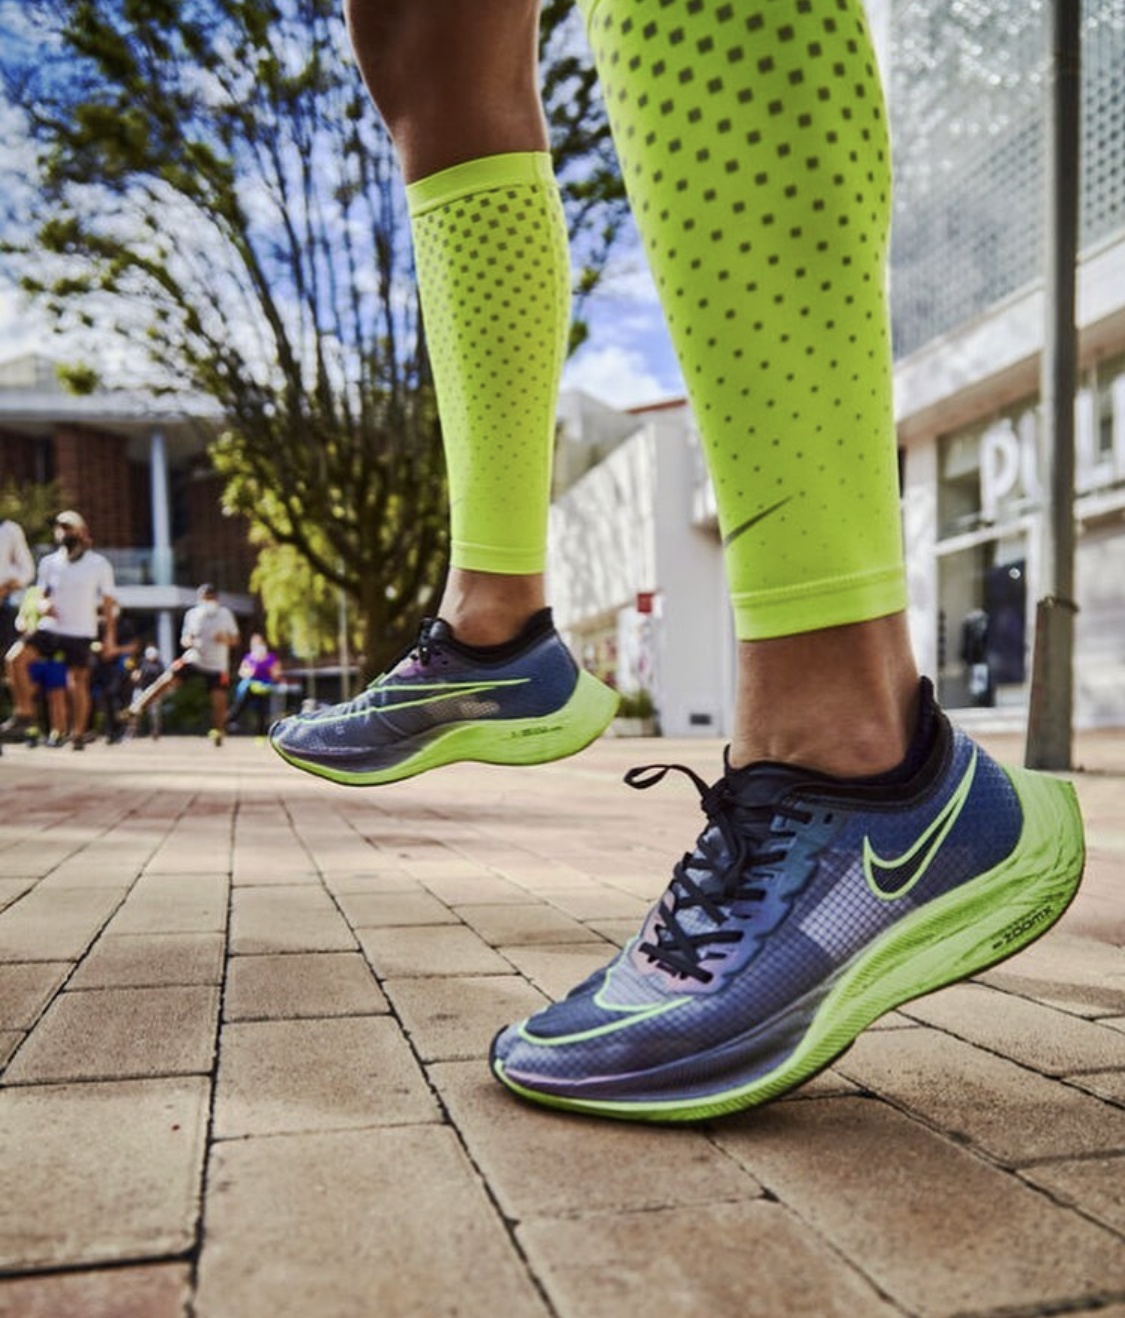 Are Cushioned Running Shoes Bad?